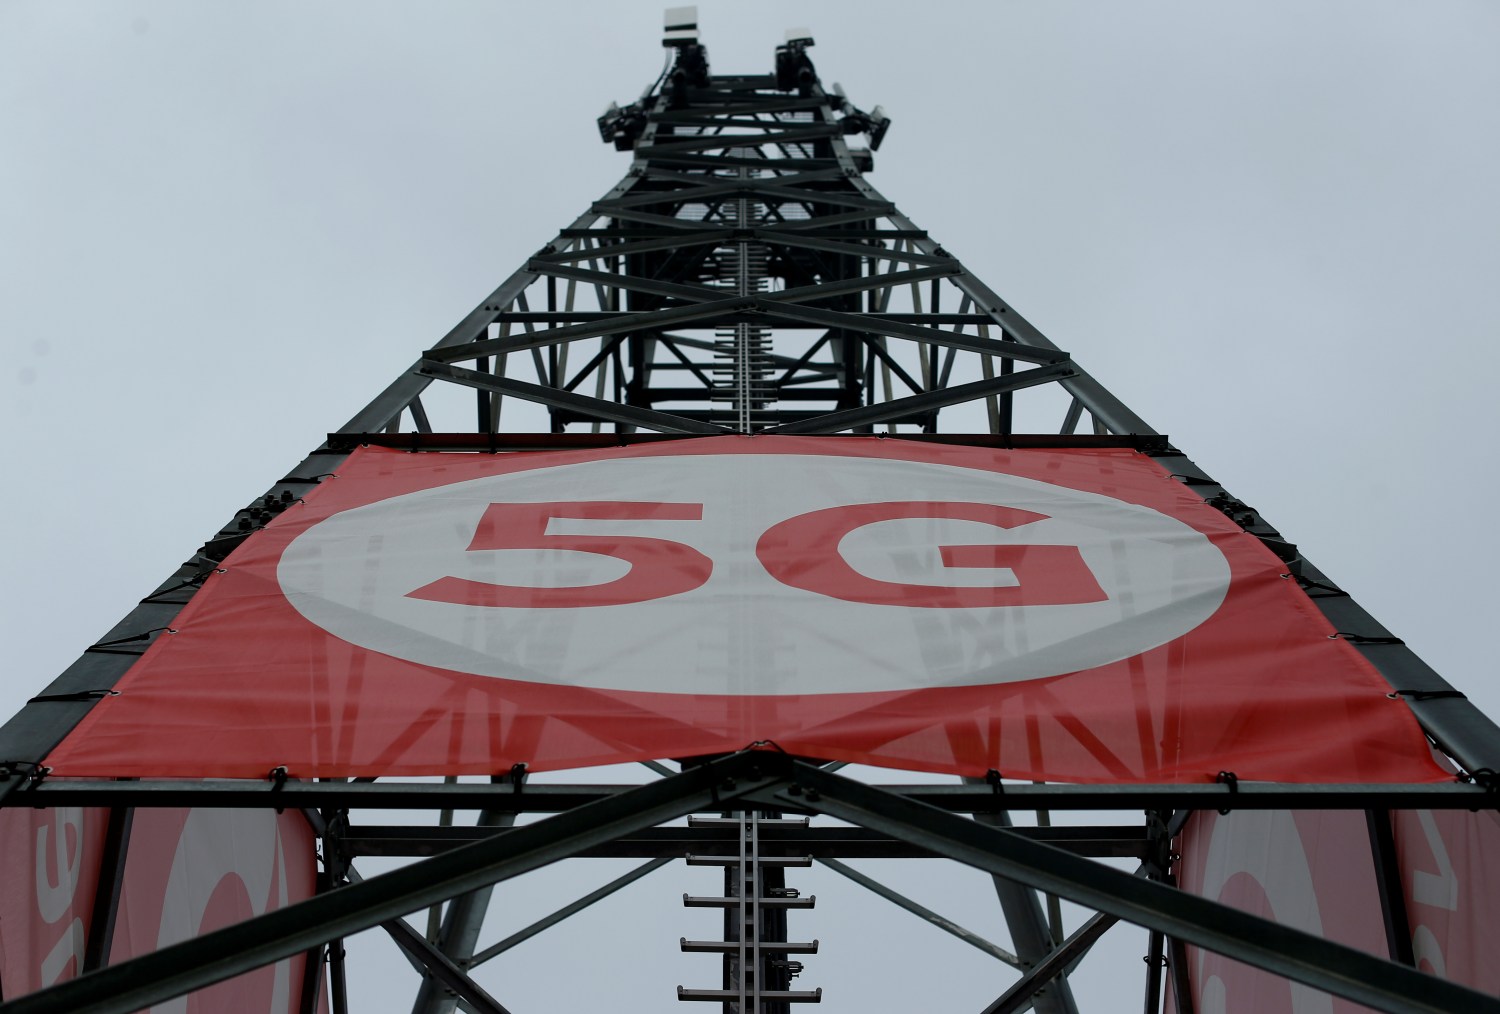 A mobile phone mast with 5G technology is pictured at the 5G Mobility Lab of telecommunications company Vodafone in Aldenhoven, Germany, November 27, 2018. Picture taken November 27, 2018. REUTERS/Thilo Schmuelgen - RC18E49931E0